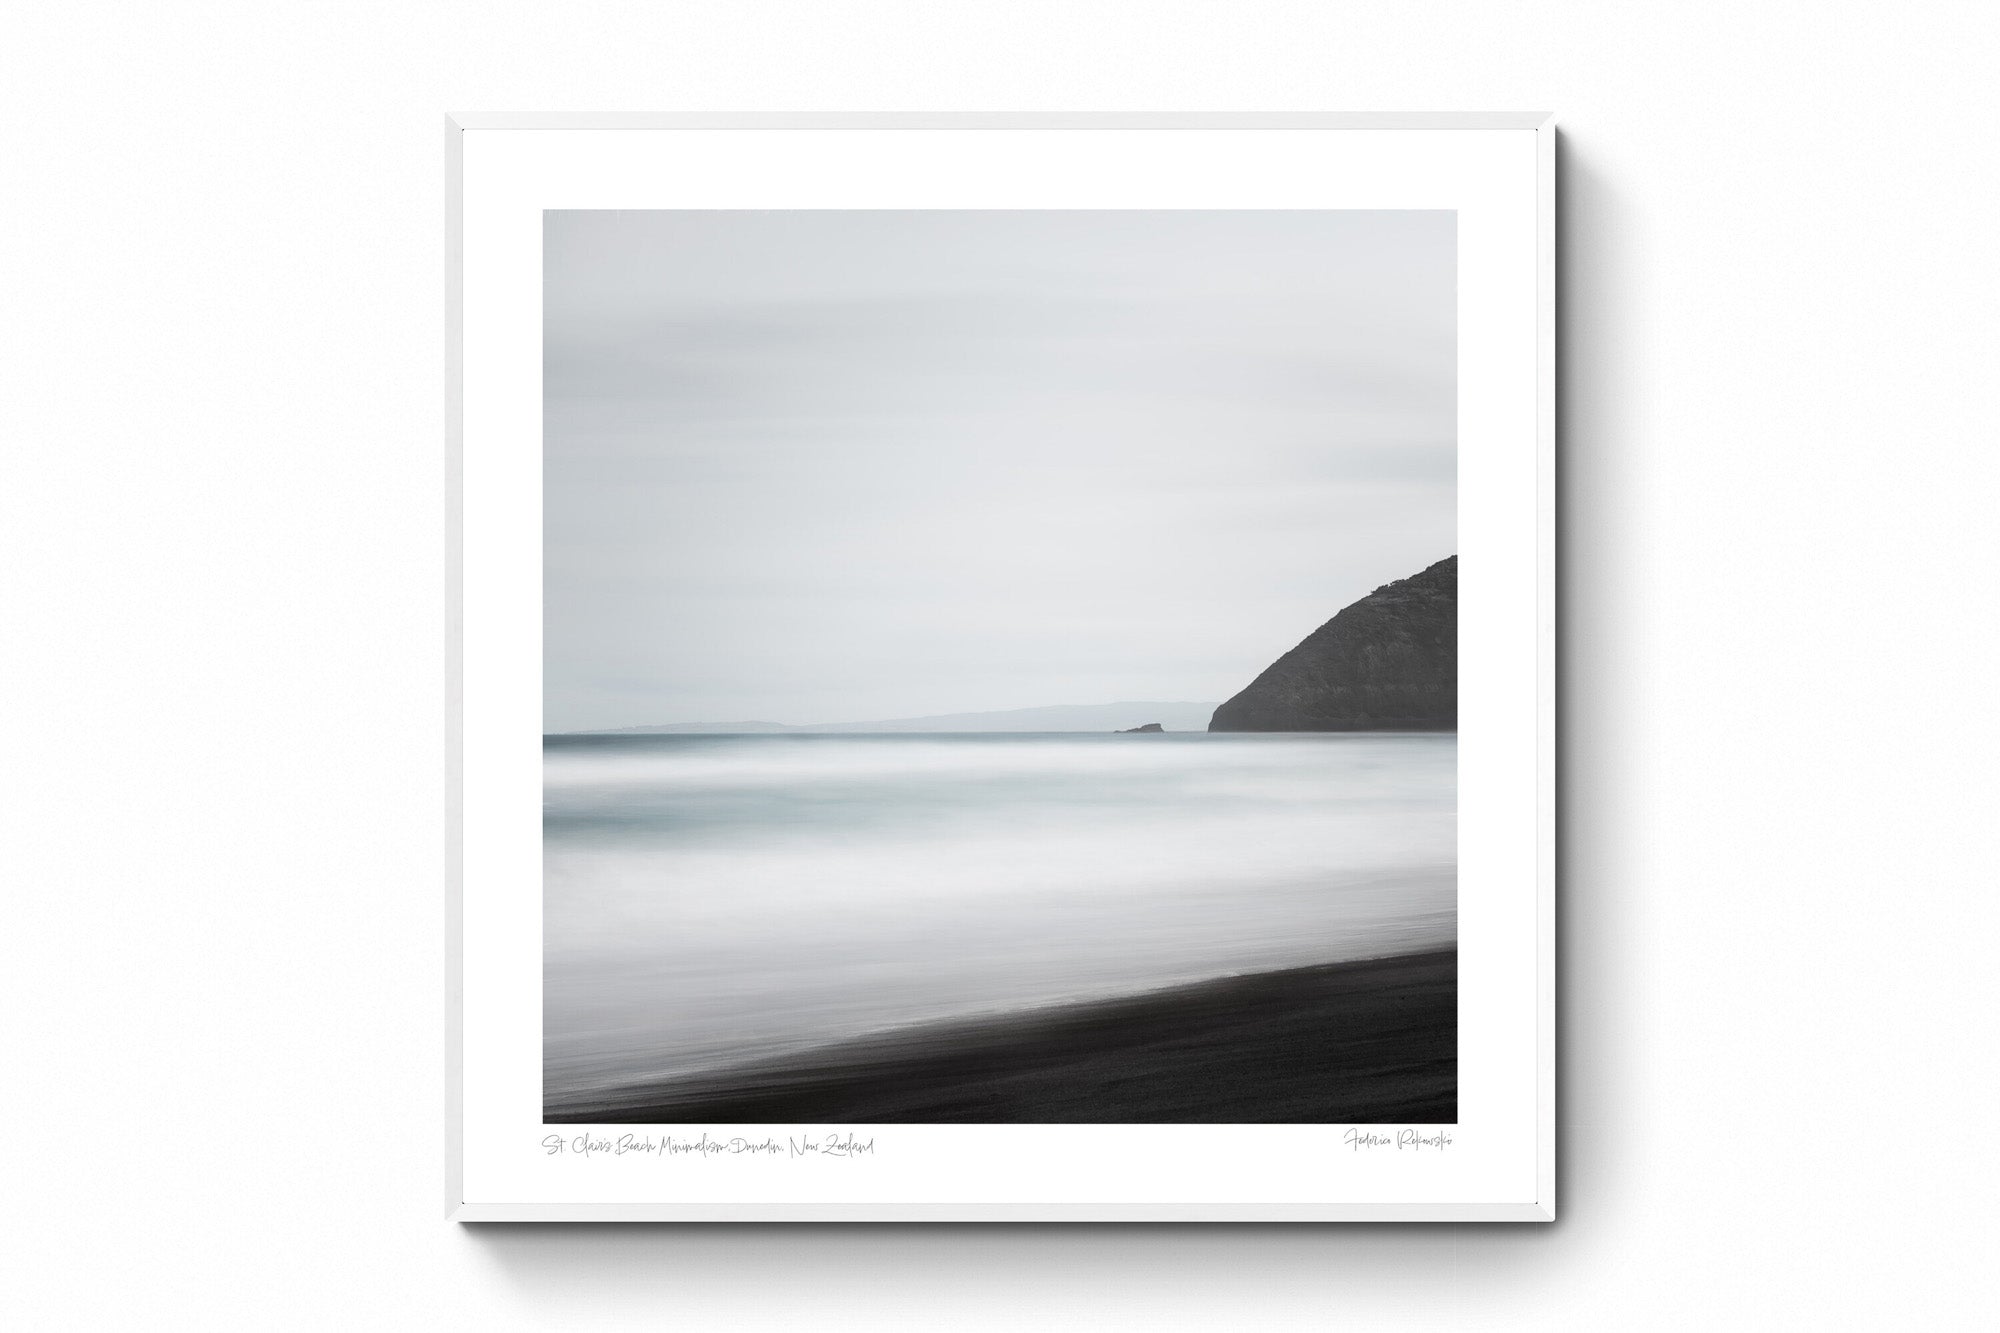 A minimalist long exposure photo of the calm sea meeting the dark sands of St. Clair's Beach in New Zealand, with a headland silhouette on the right.